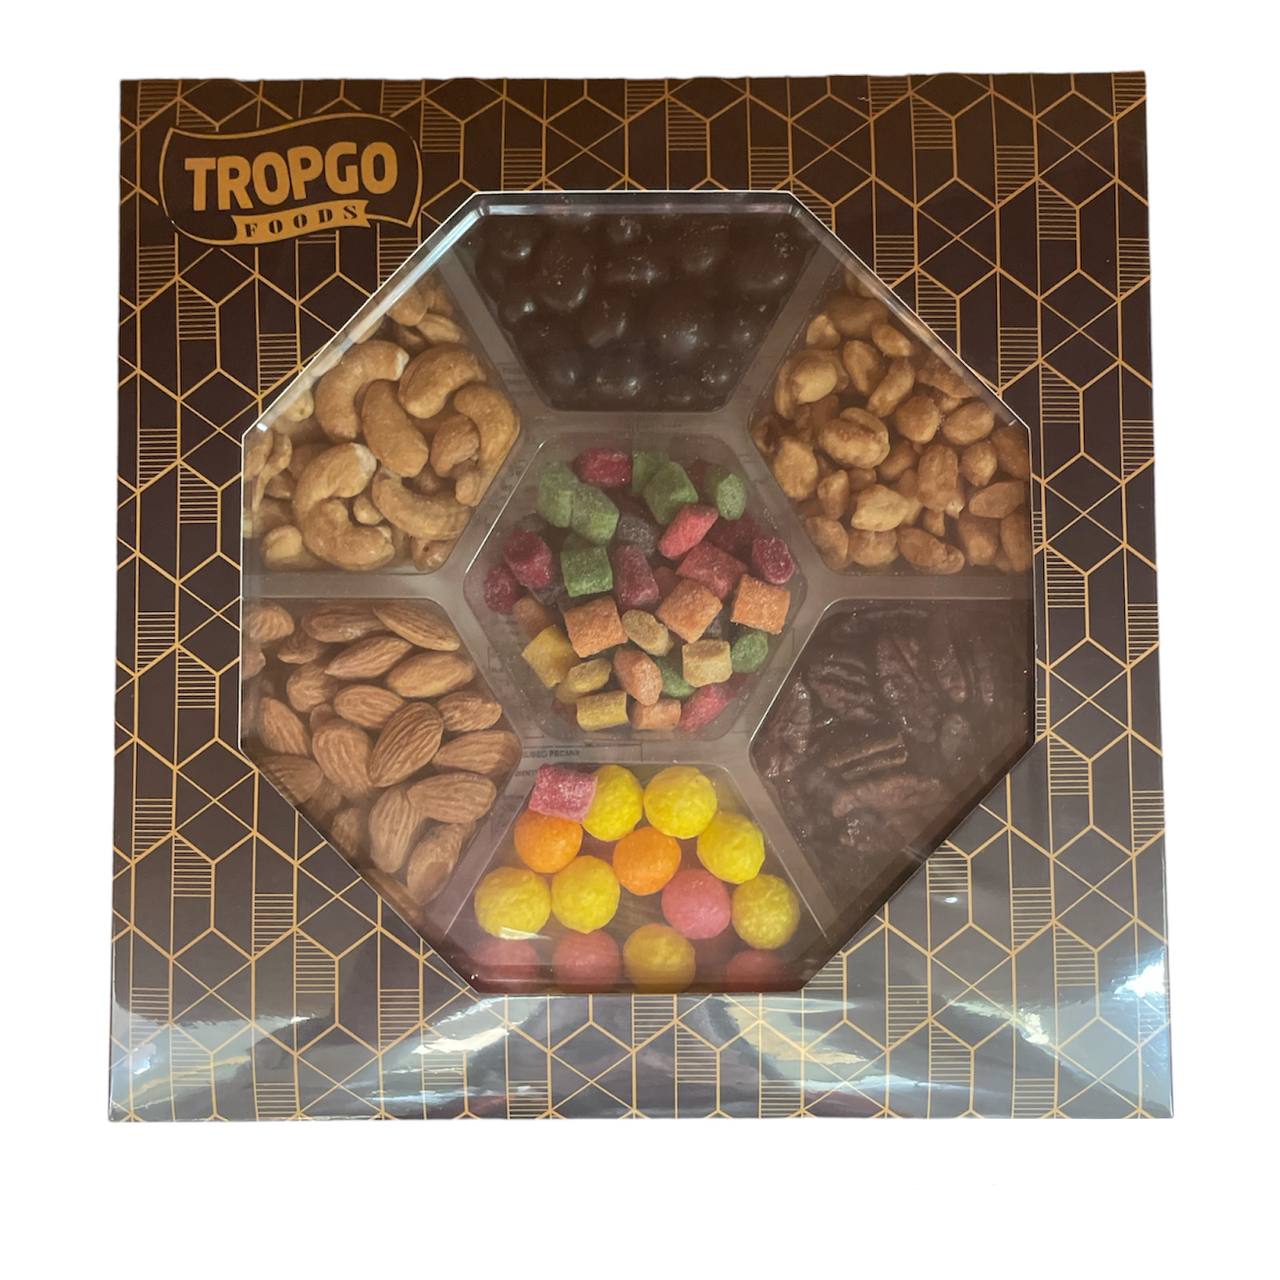 Tropgo 7 compartment - Candy & Nut Tray